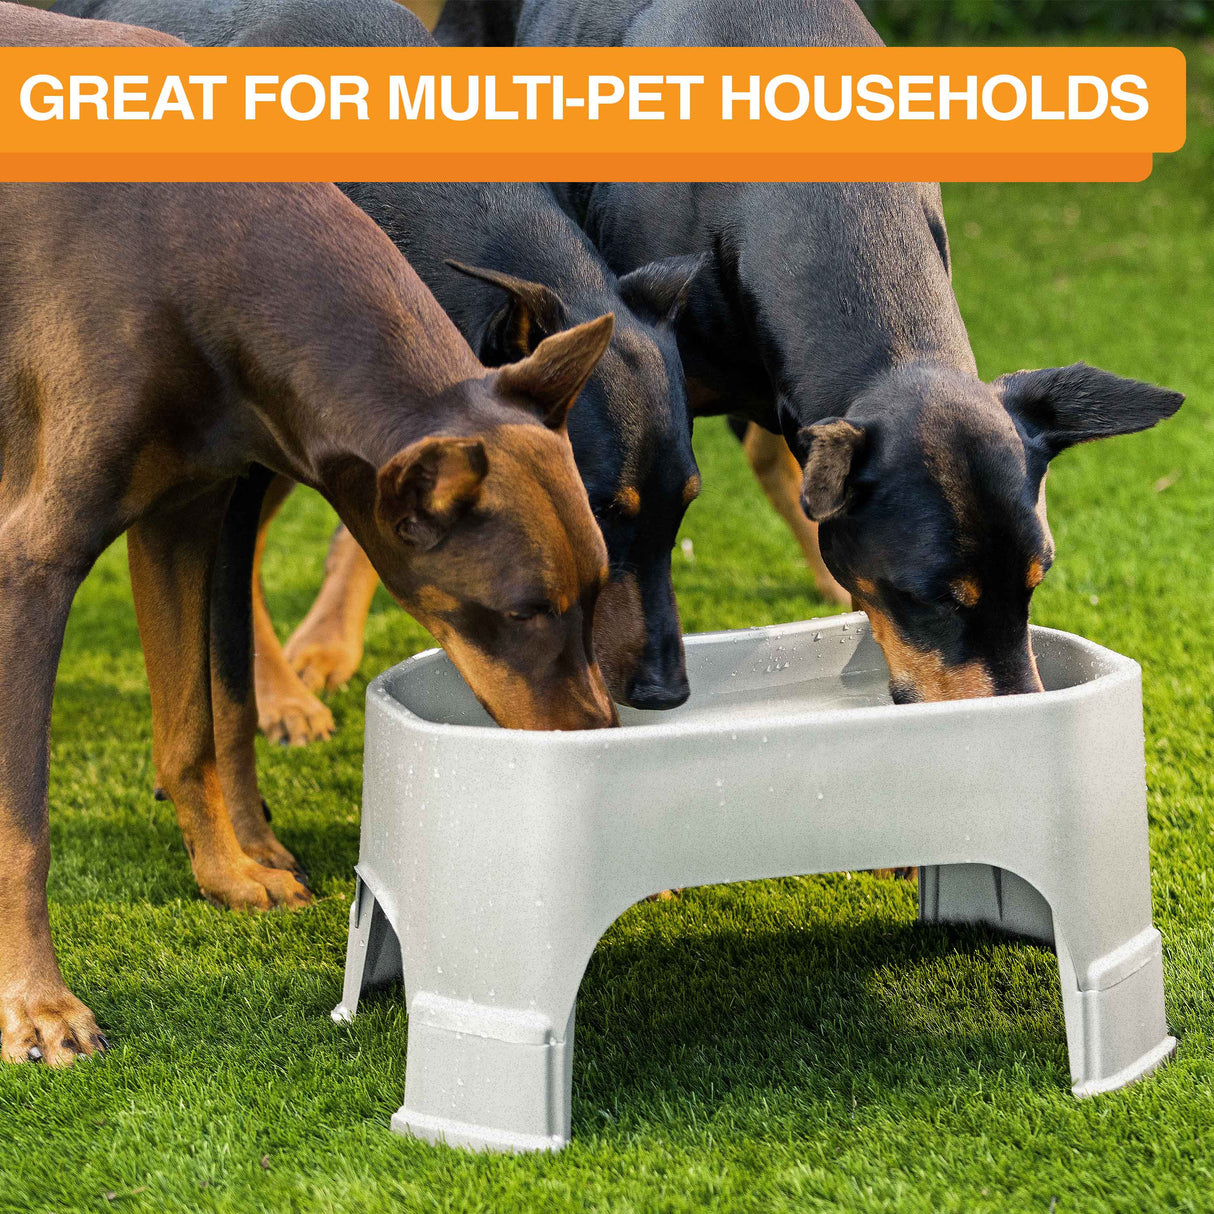 Giant Bowl is great for multiple pet households